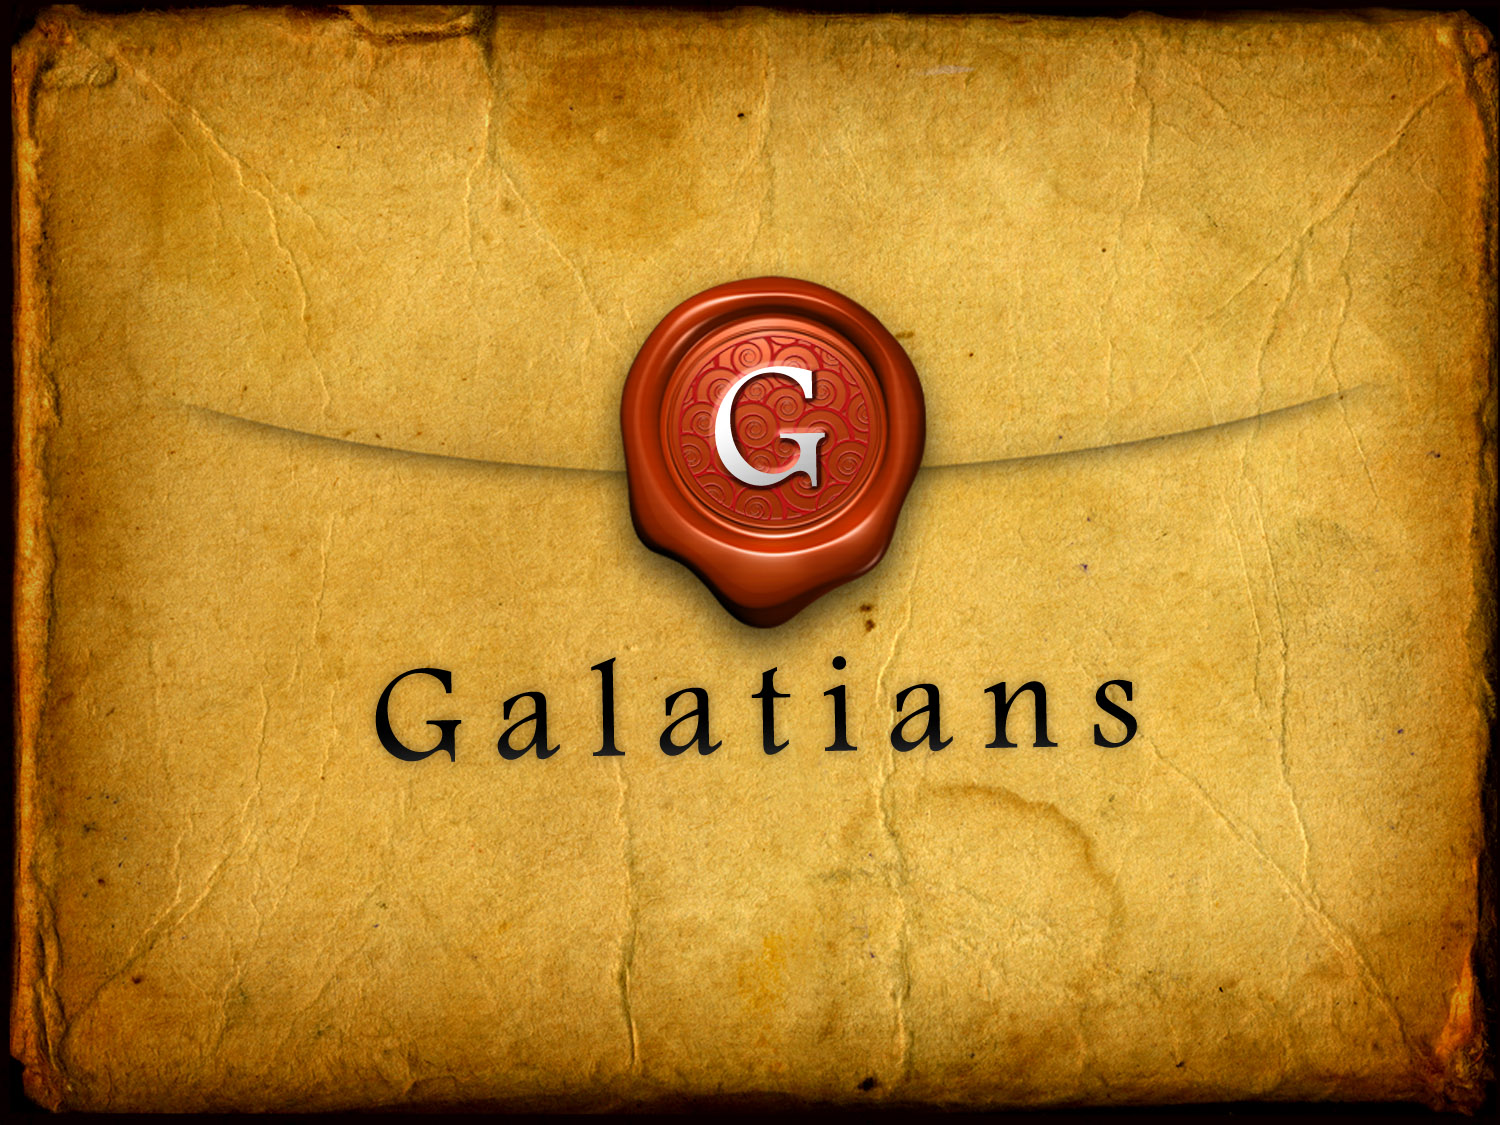 The Book of Galatians 3:6-10